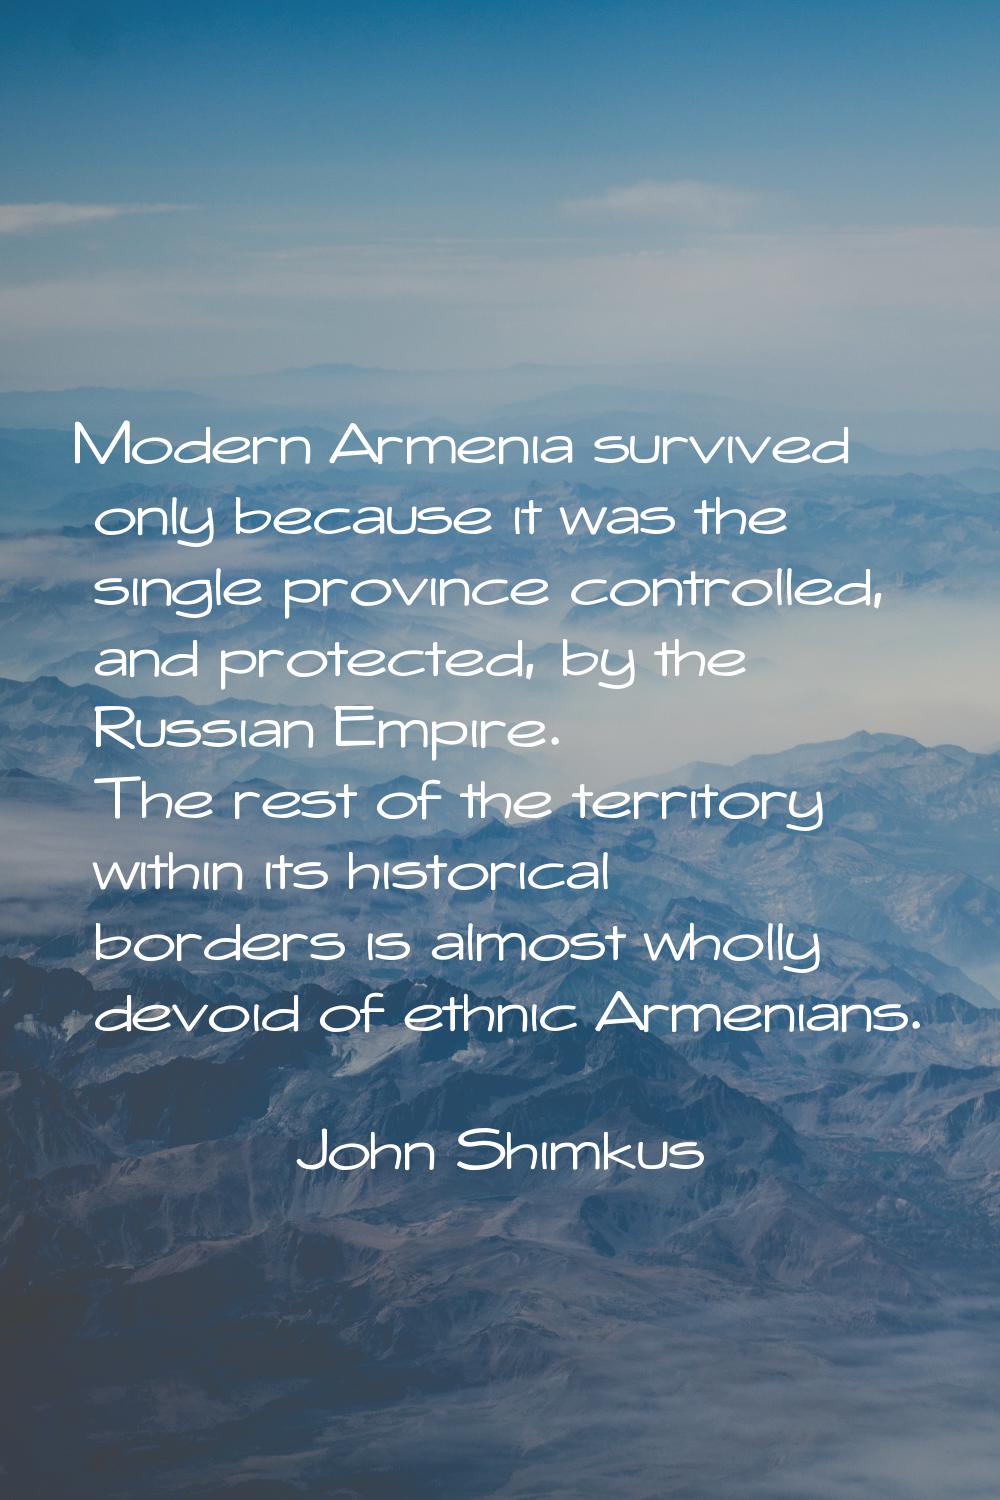 Modern Armenia survived only because it was the single province controlled, and protected, by the R